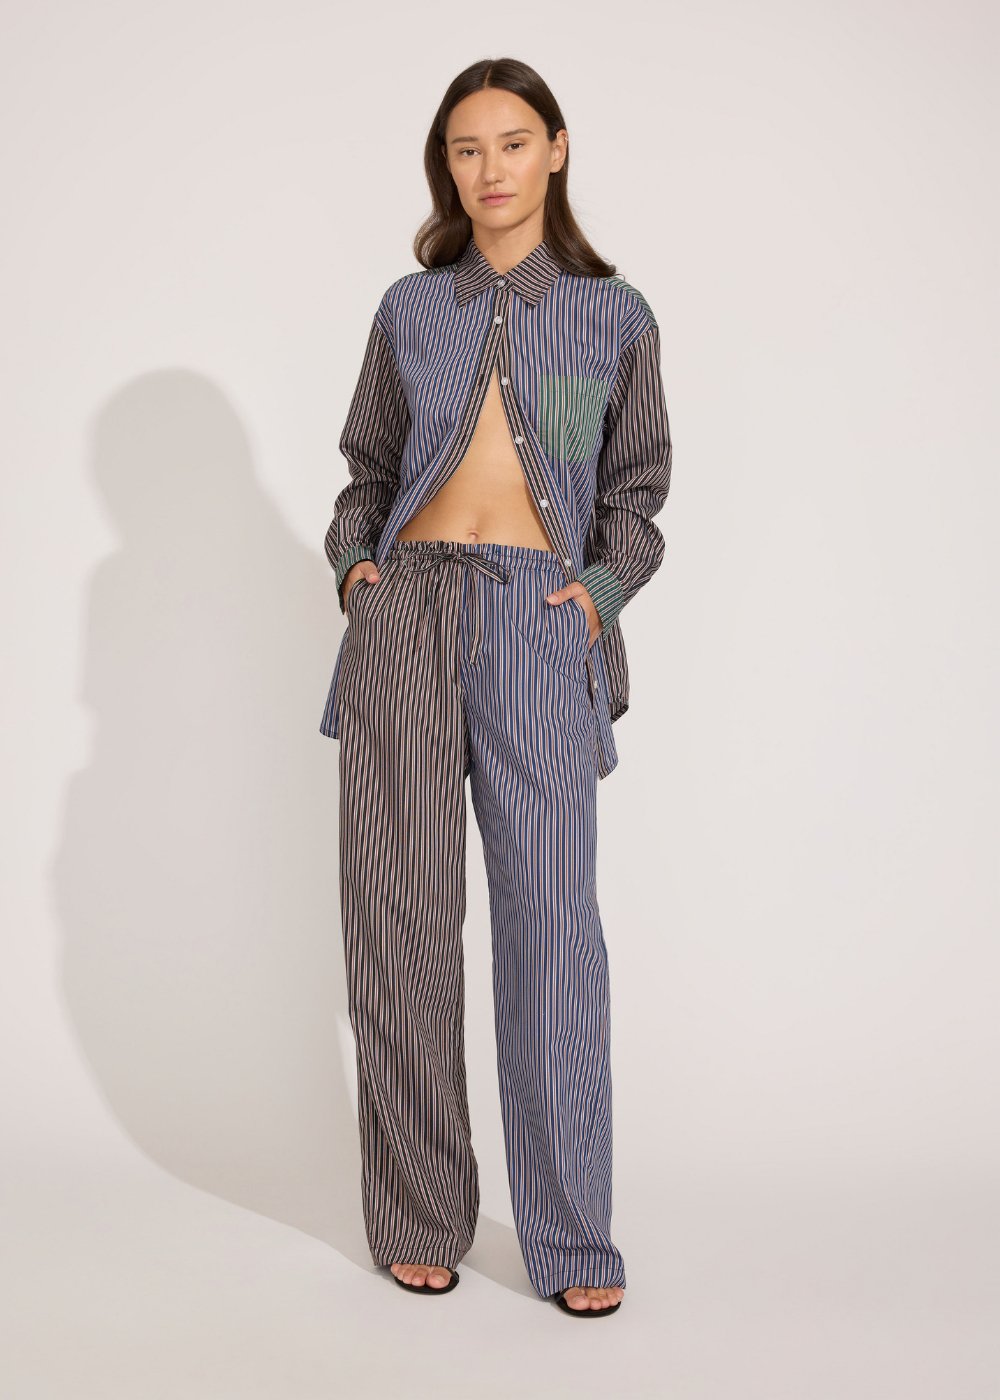 The Allegra Pant - Solid & Striped